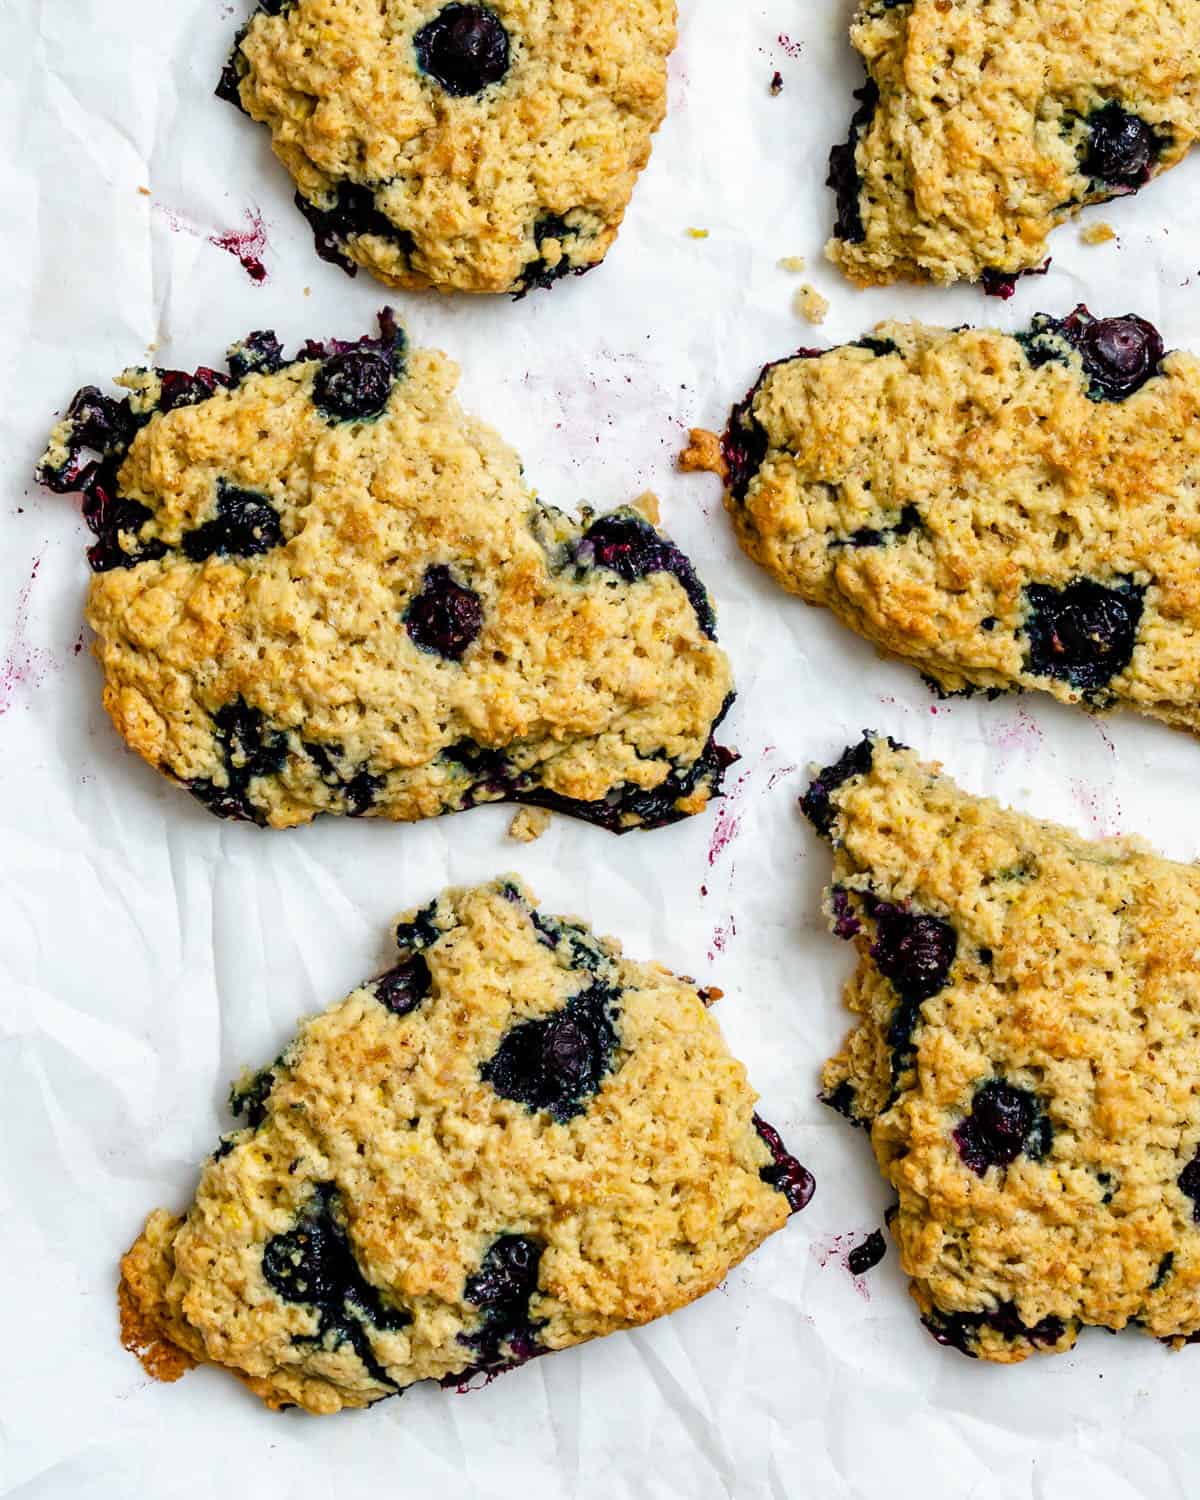 completed Vegan Lemon Blueberry Scones scattered on a white surface